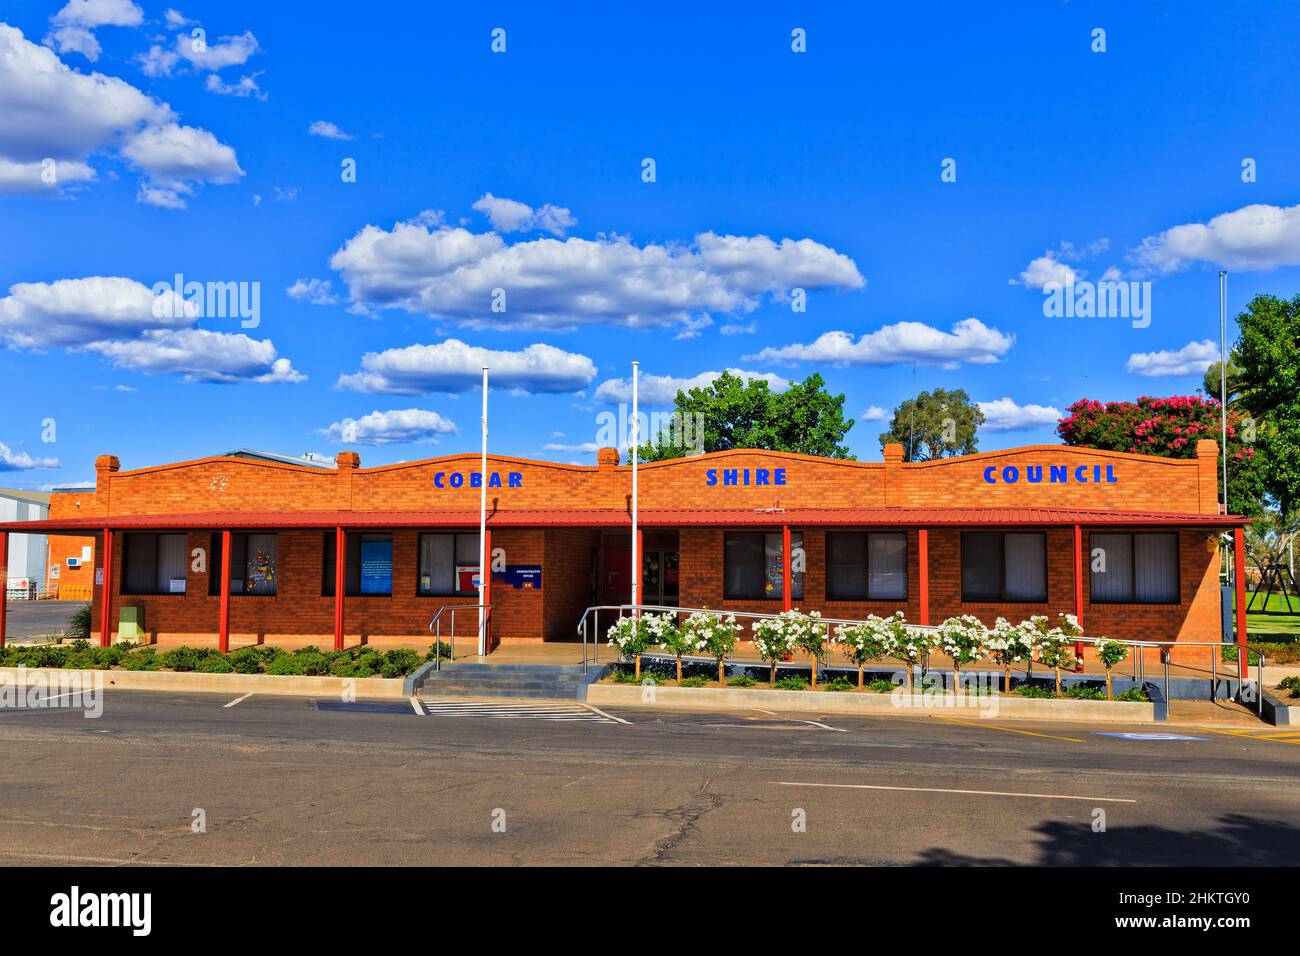 Cobar shire council public services chambers in regional local mining town Cobar of outback australia. Stock Photo